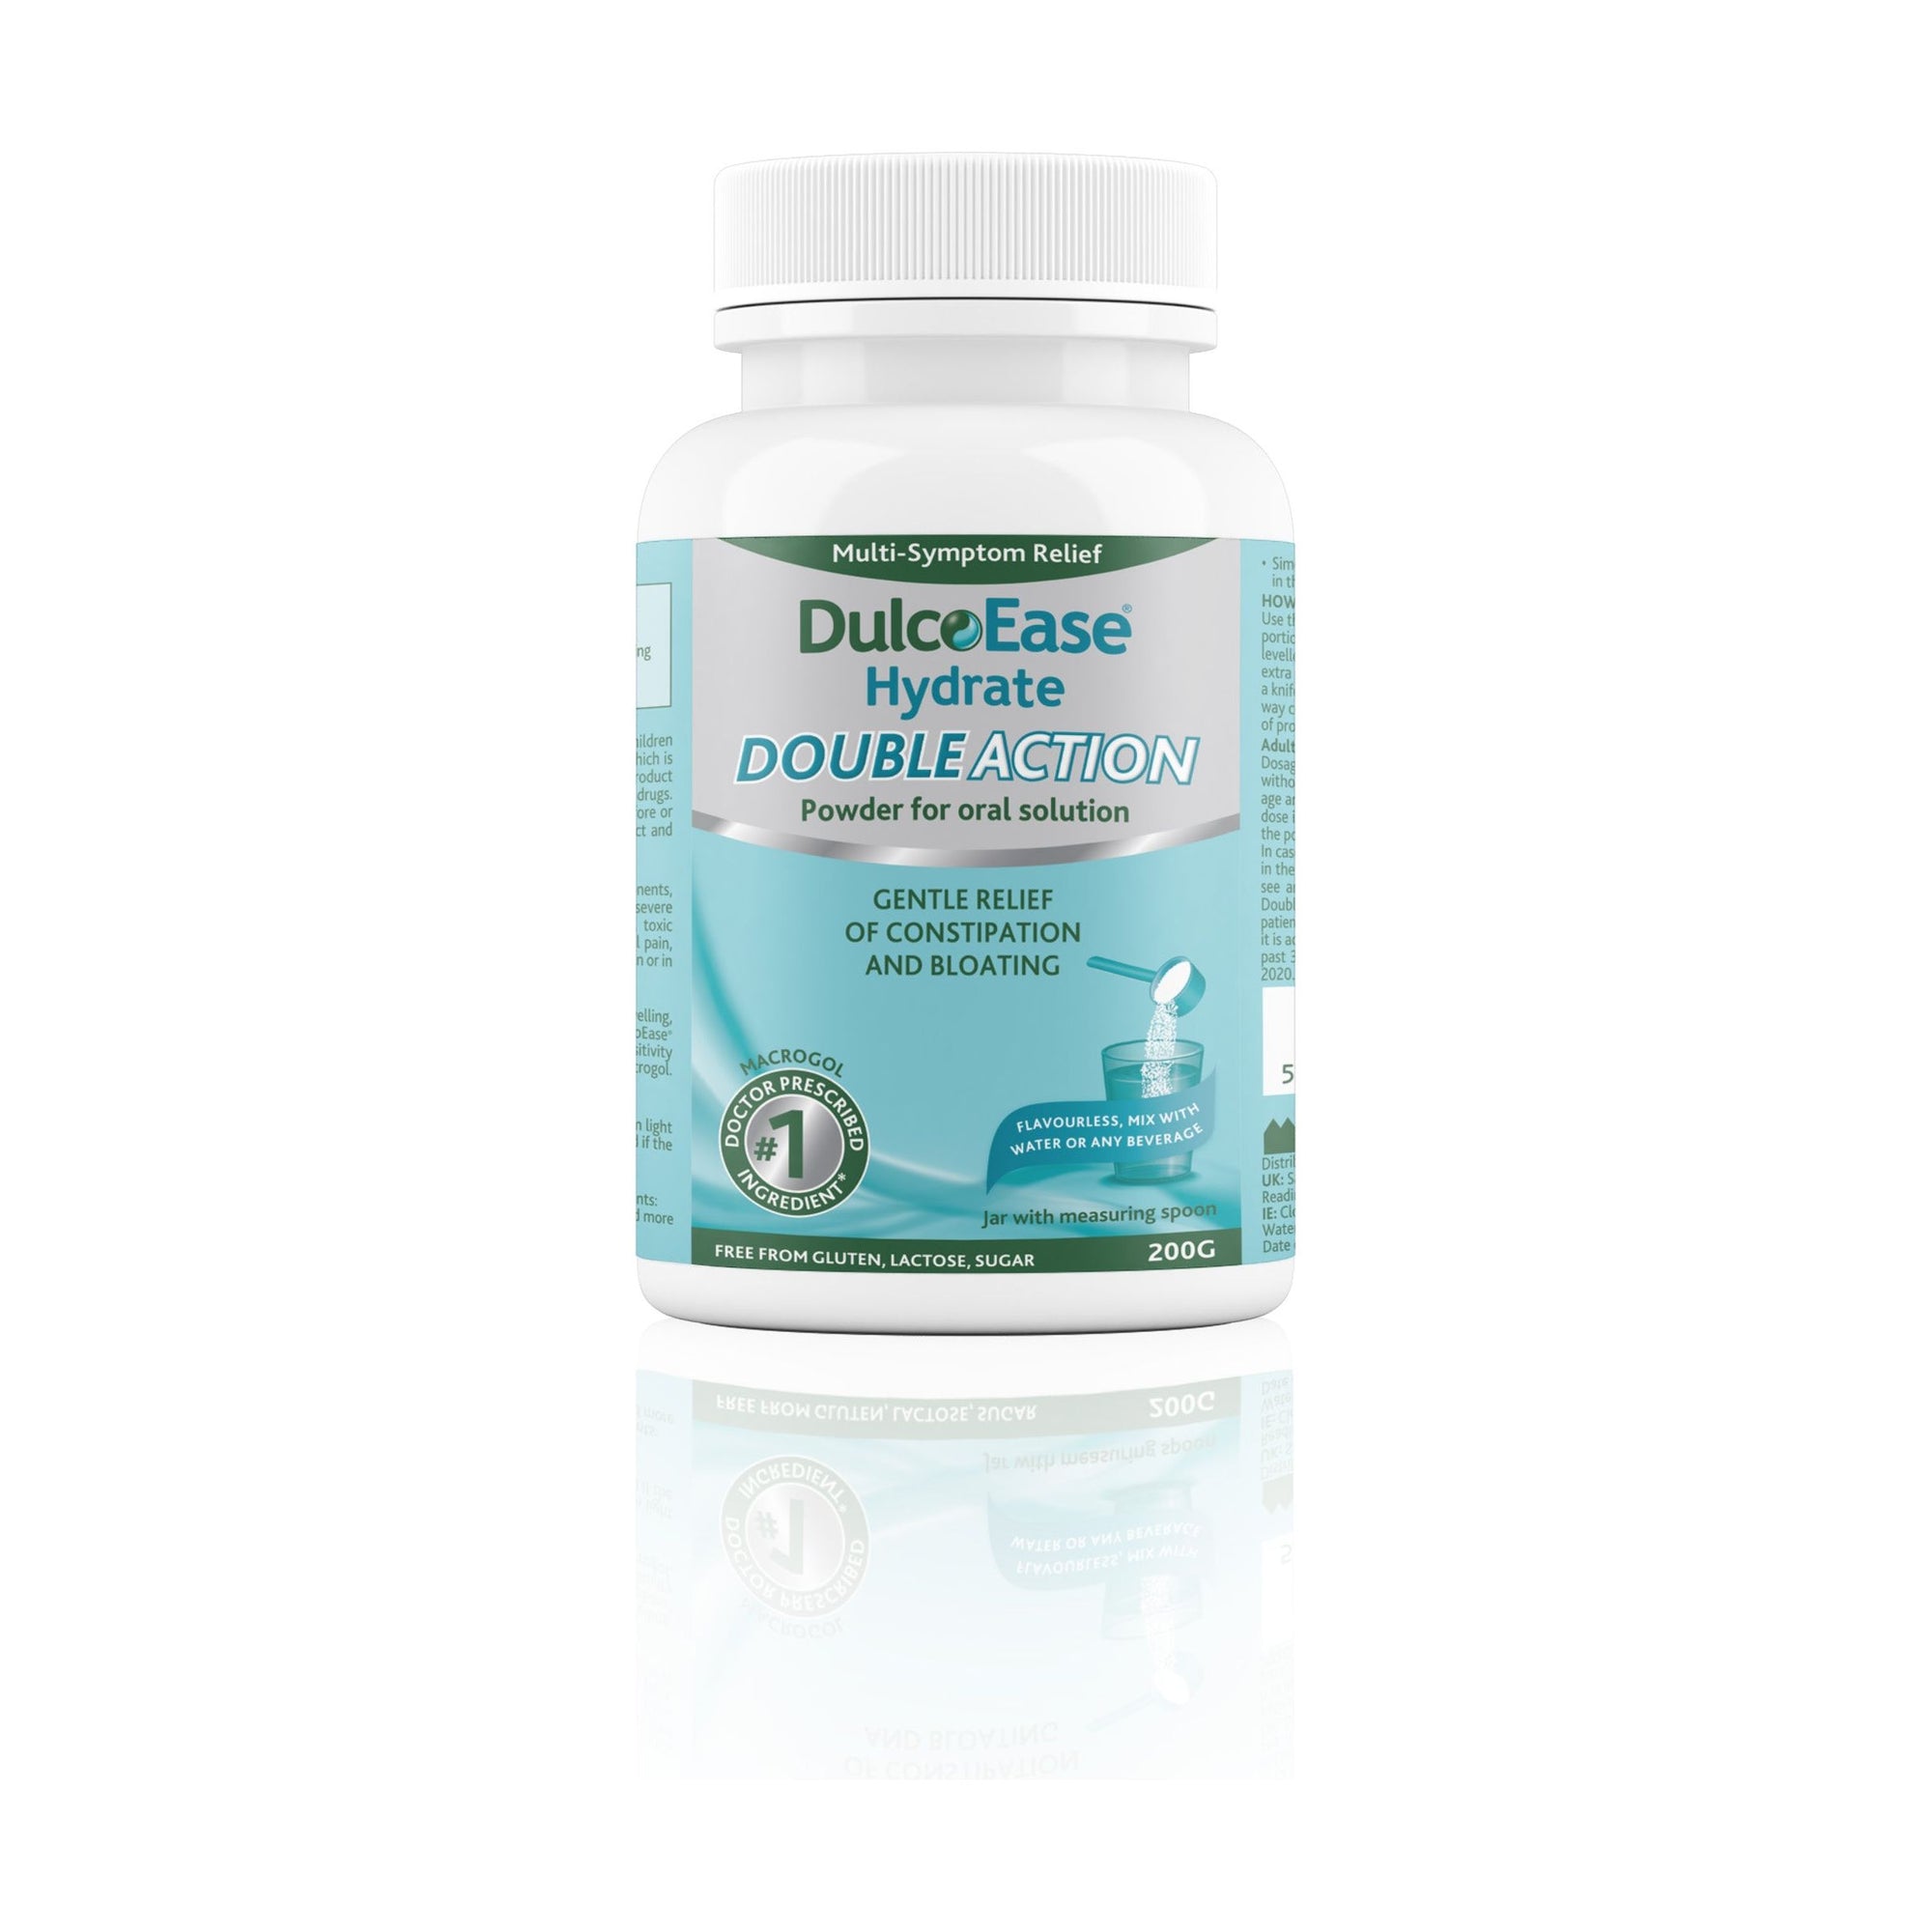 DulcoEase Hydrate Double Action Powder